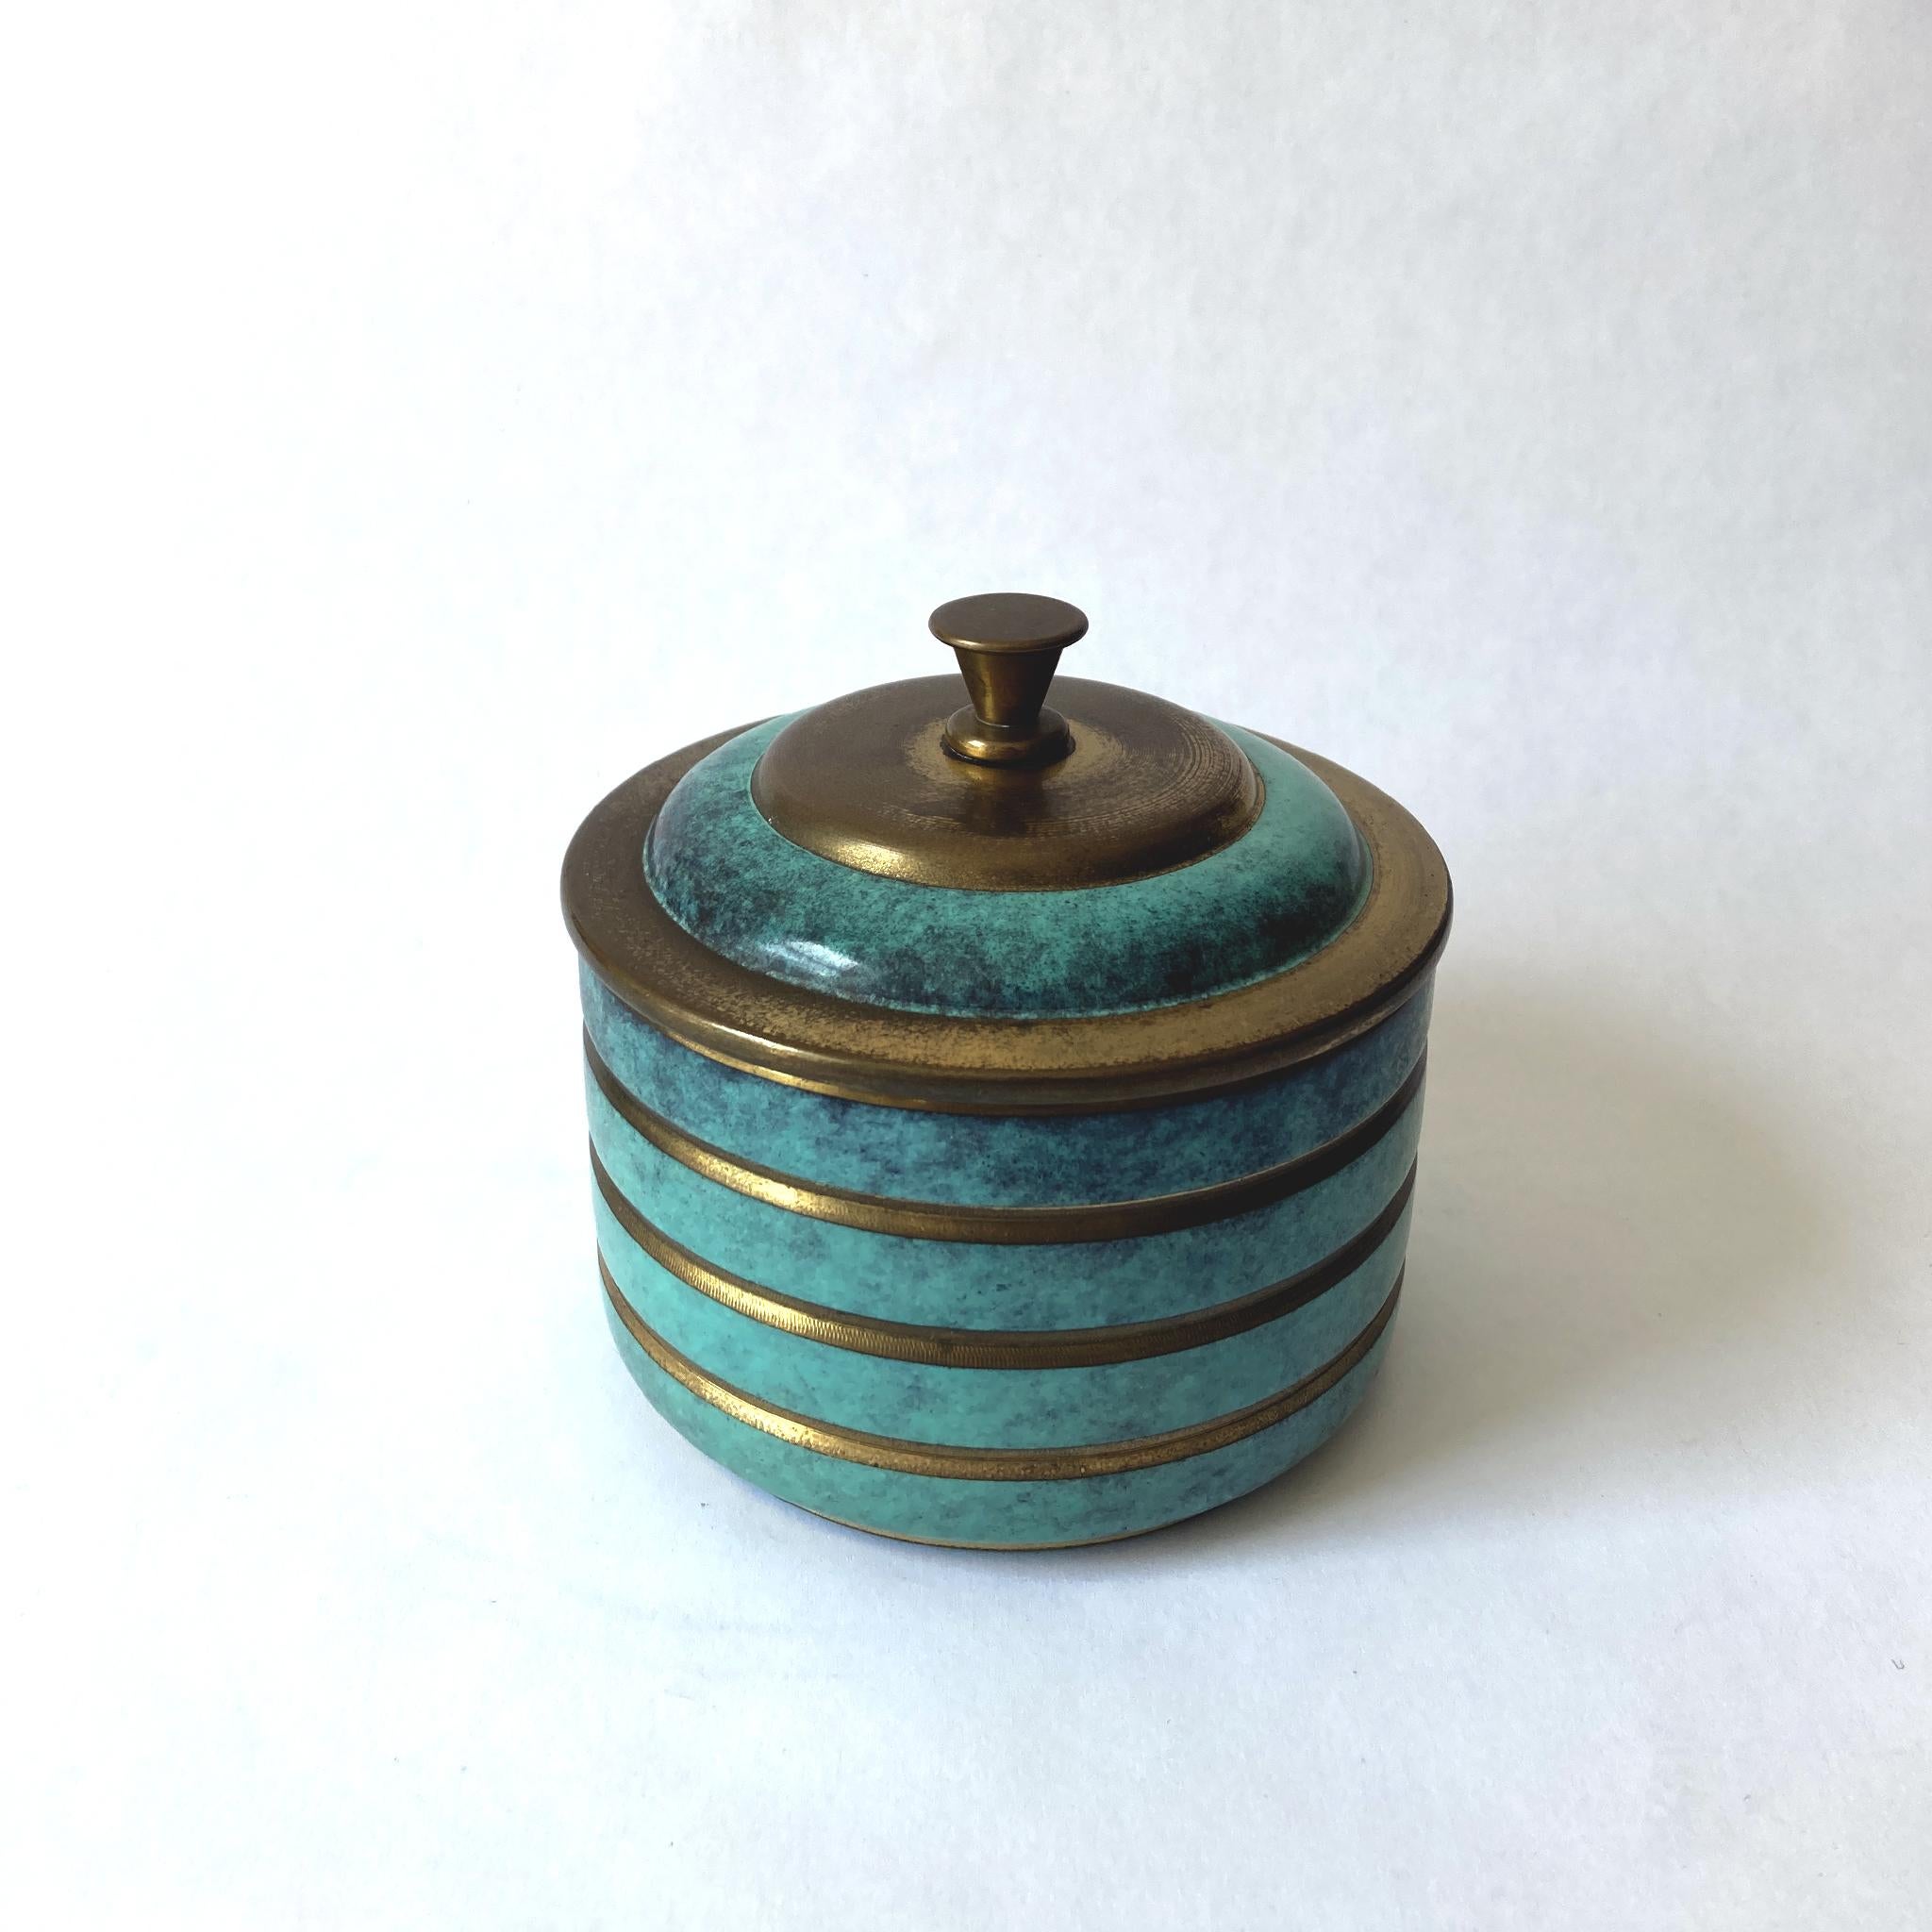 Rare WMF Ikora metal lidded box. The patinated turquoise green metal contrasts beautifully with the gold ringed design. This piece looks wonderful as part of a group, or independently on a dresser or side table. Signed WMF Ikora, see photos. In good